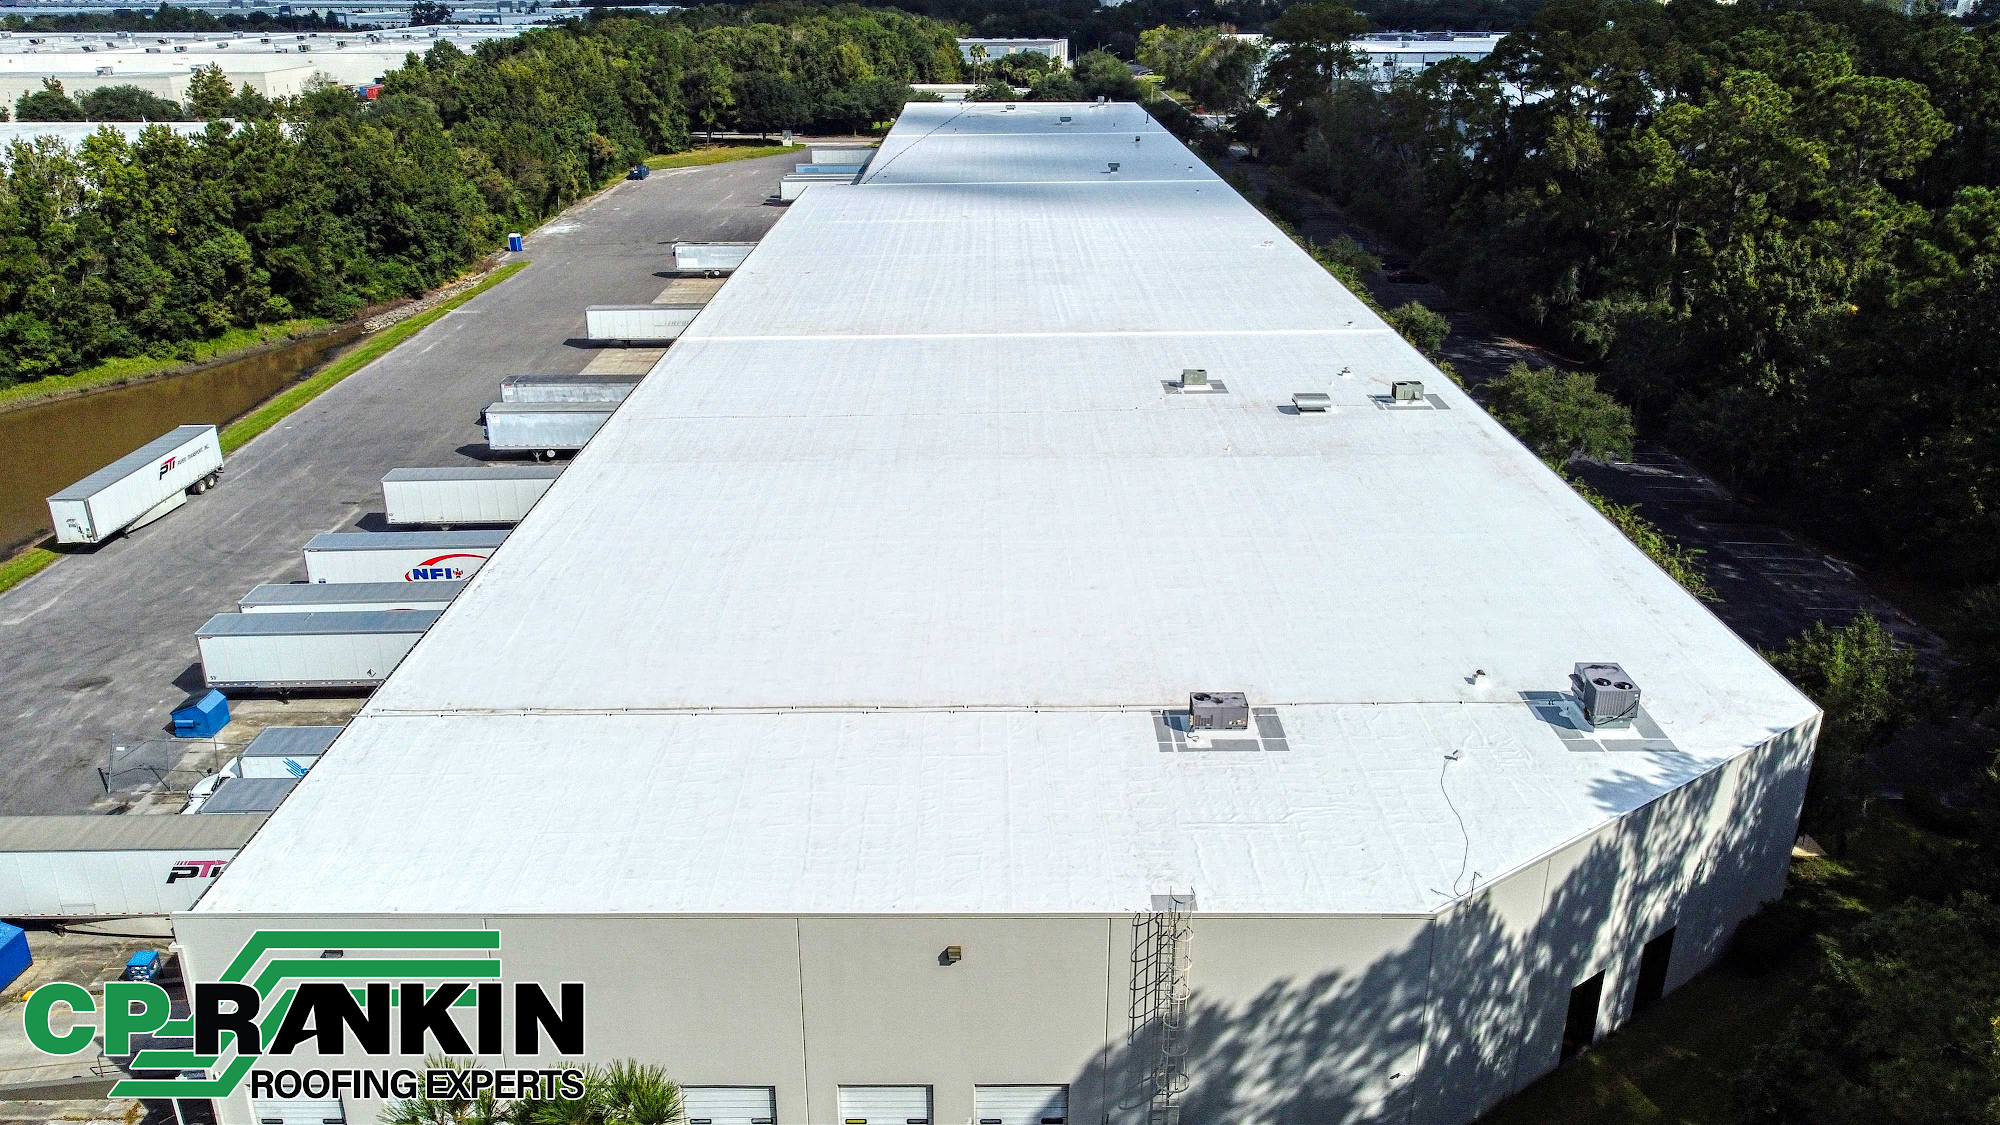 CP Rankin Inc. - Roofing Experts